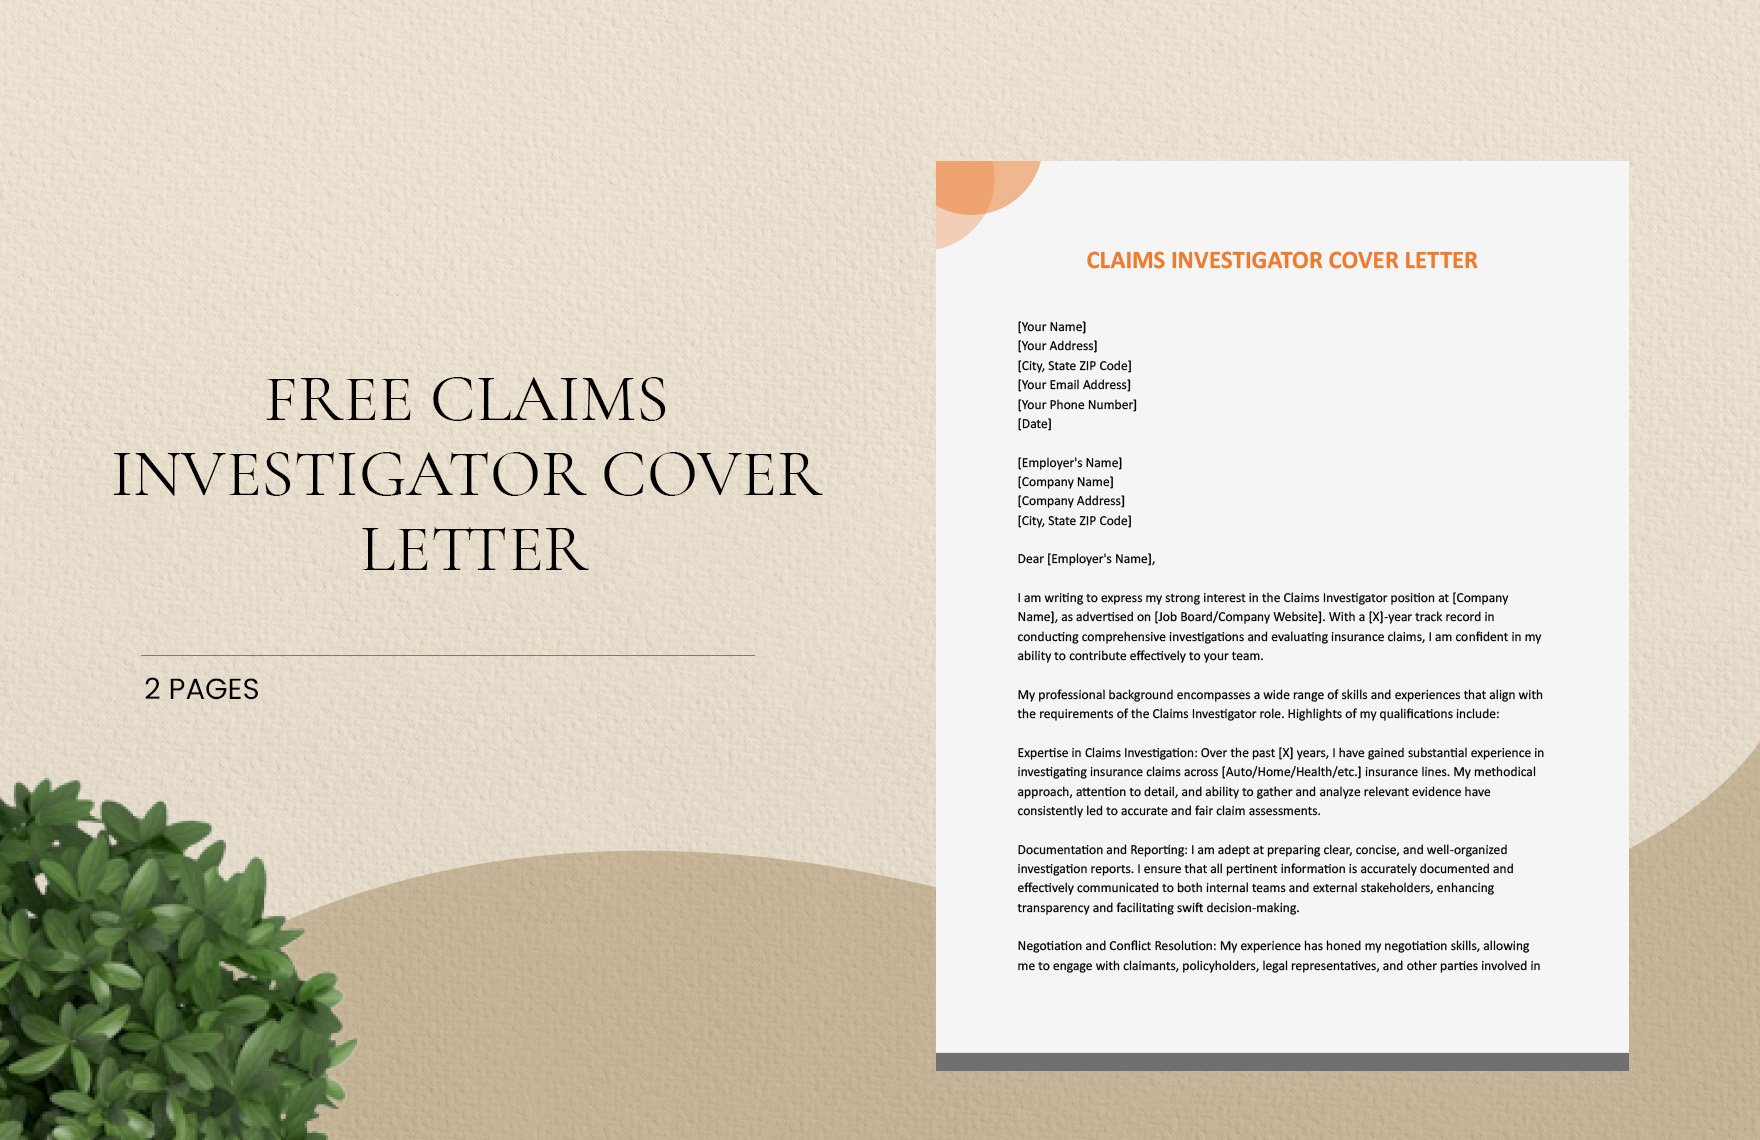 Claims Investigator Cover Letter